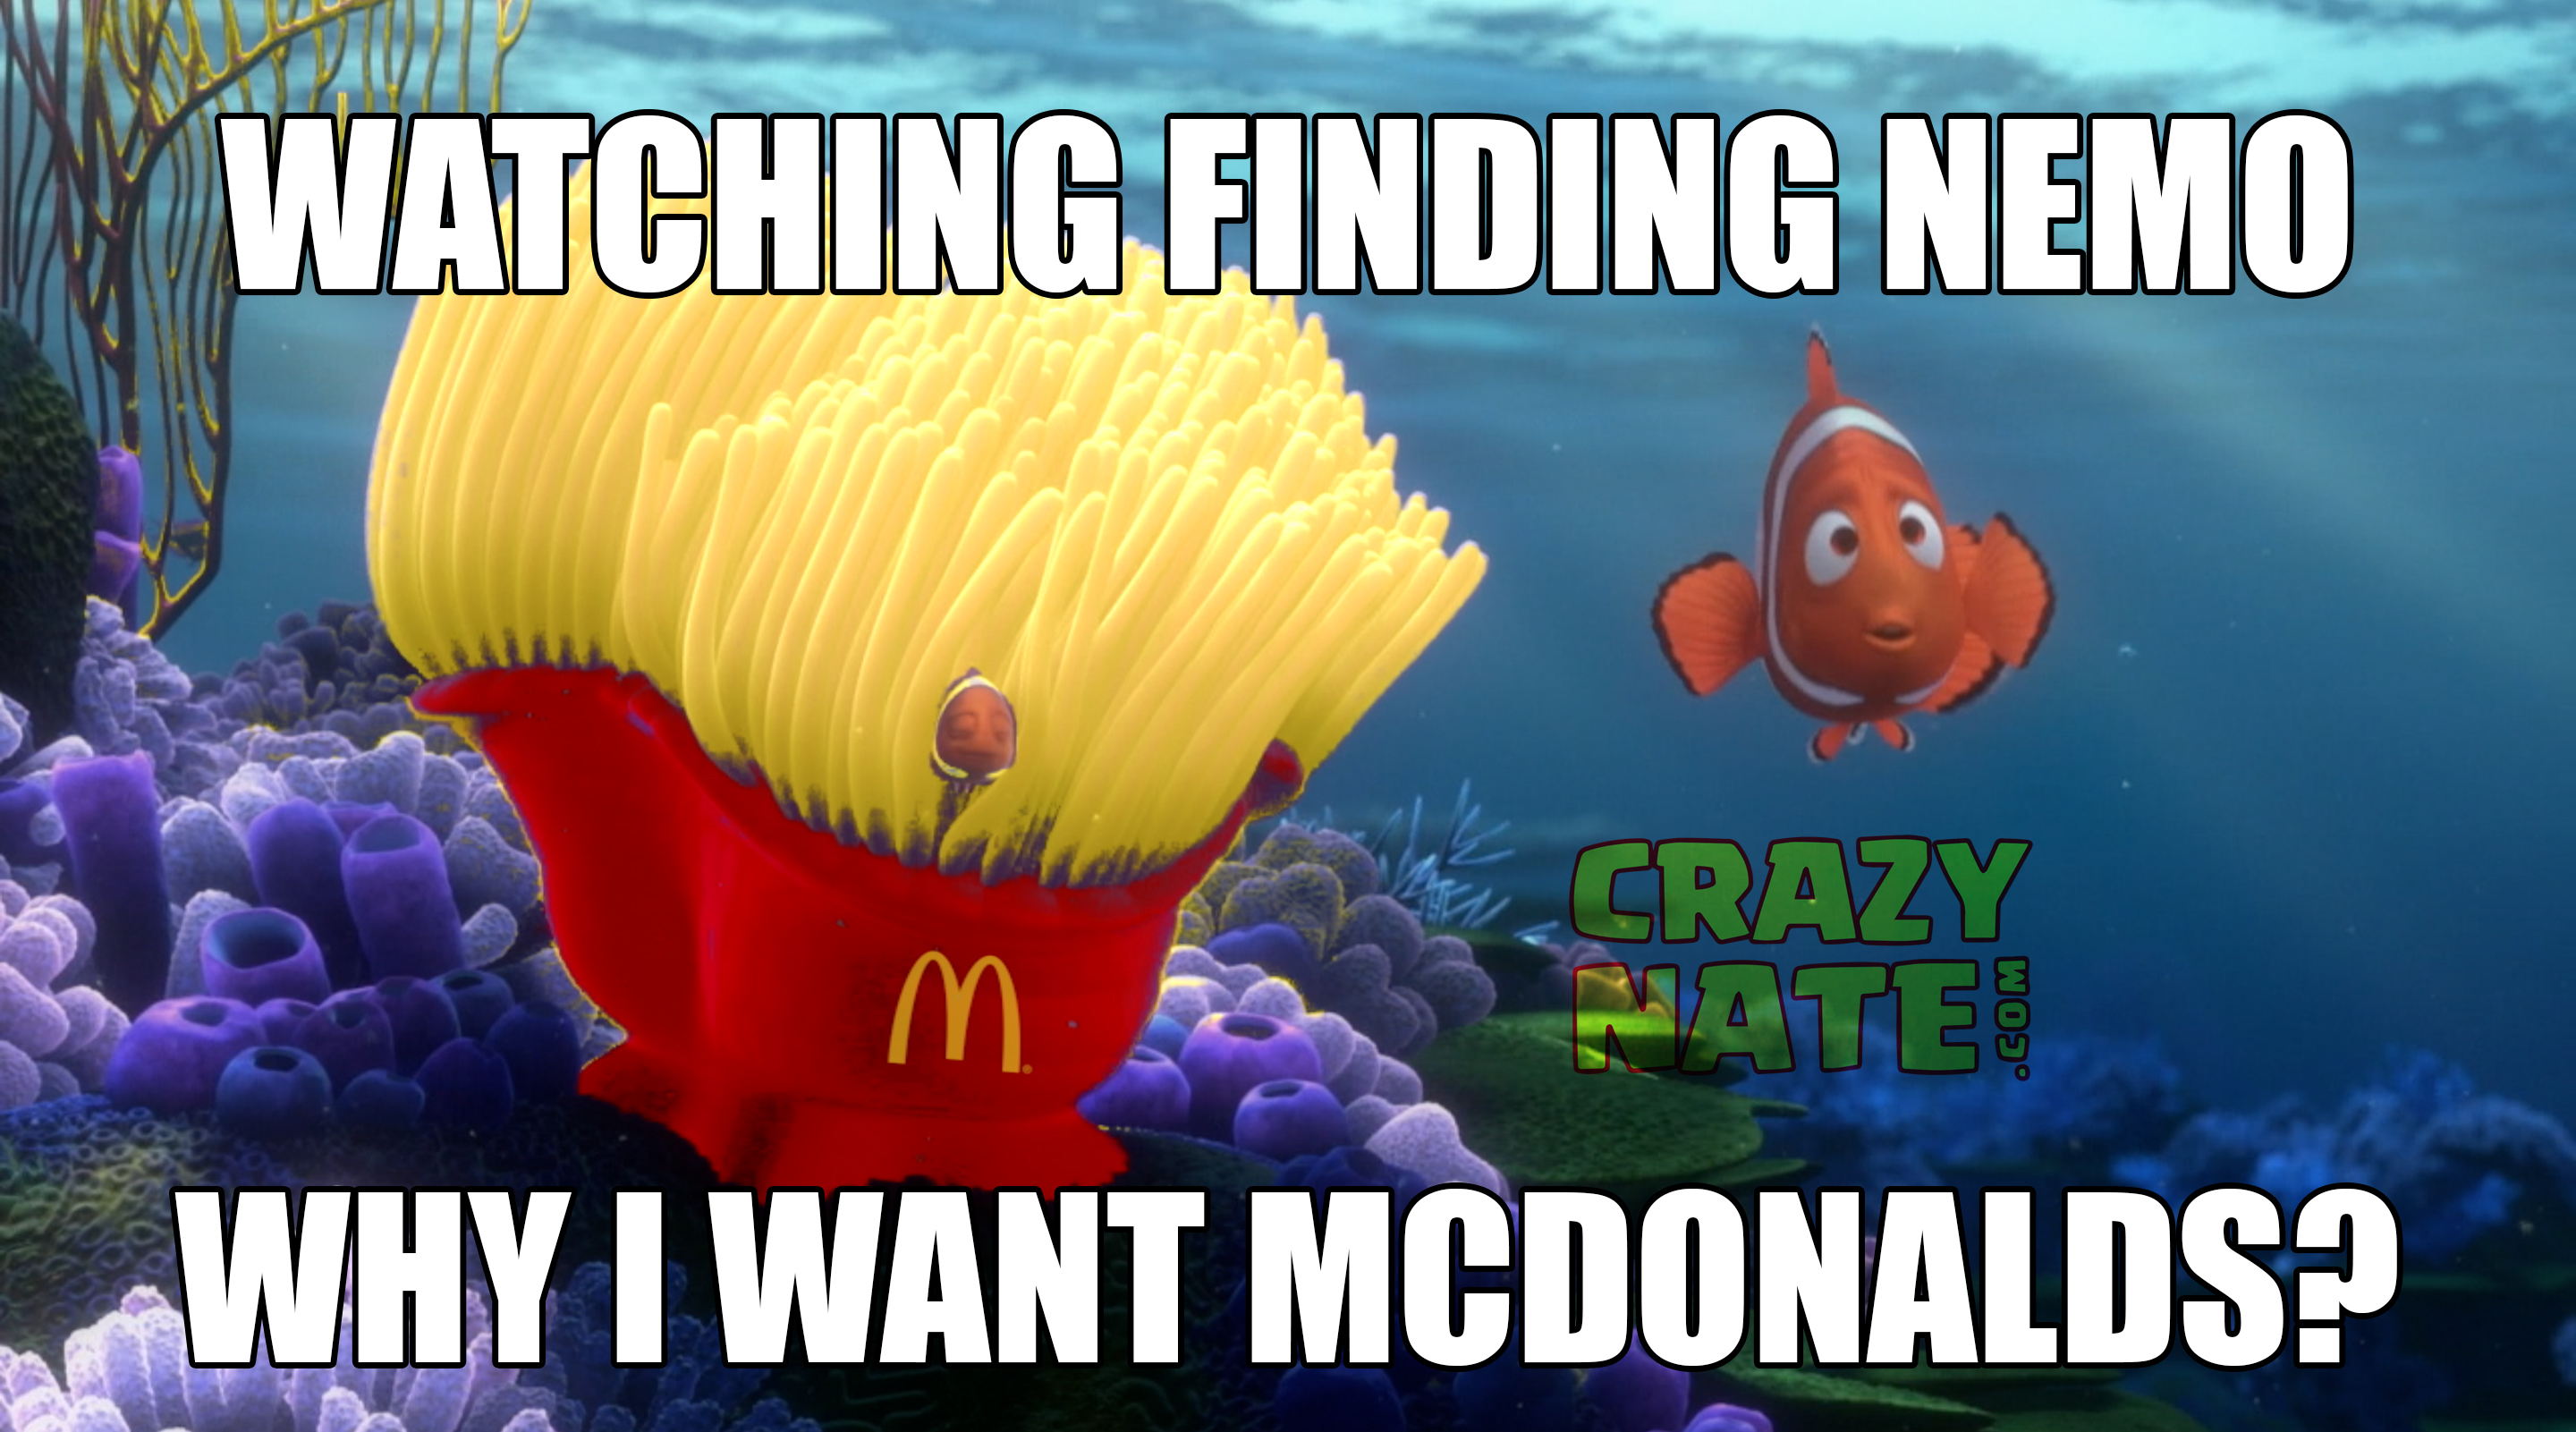 Watching finding nemo, and all of a sudden I want Mcdonalds MEME